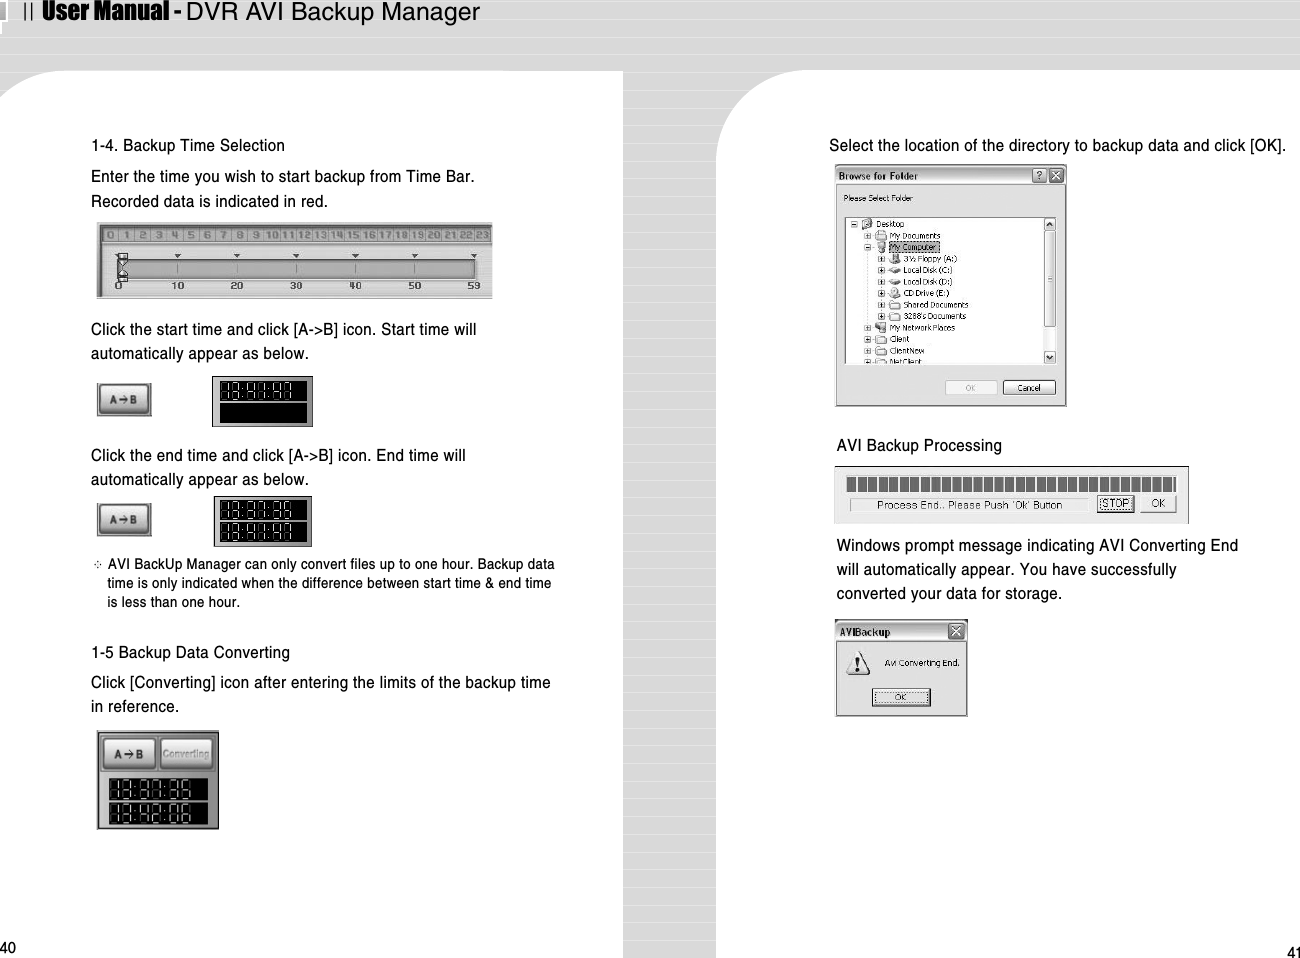 ⅡUser Manual - DVR AVI Backup Manager40 411-4. Backup Time SelectionEnter the time you wish to start backup from Time Bar. Recorded data is indicated in red.1-5 Backup Data ConvertingClick [Converting] icon after entering the limits of the backup timein reference. Click the start time and click [A-&gt;B] icon. Start time willautomatically appear as below.Select the location of the directory to backup data and click [OK]. Click the end time and click [A-&gt;B] icon. End time willautomatically appear as below. ※AVI BackUp Manager can only convert files up to one hour. Backup datatime is only indicated when the difference between start time &amp; end timeis less than one hour. AVI Backup ProcessingWindows prompt message indicating AVI Converting Endwill automatically appear. You have successfullyconverted your data for storage.